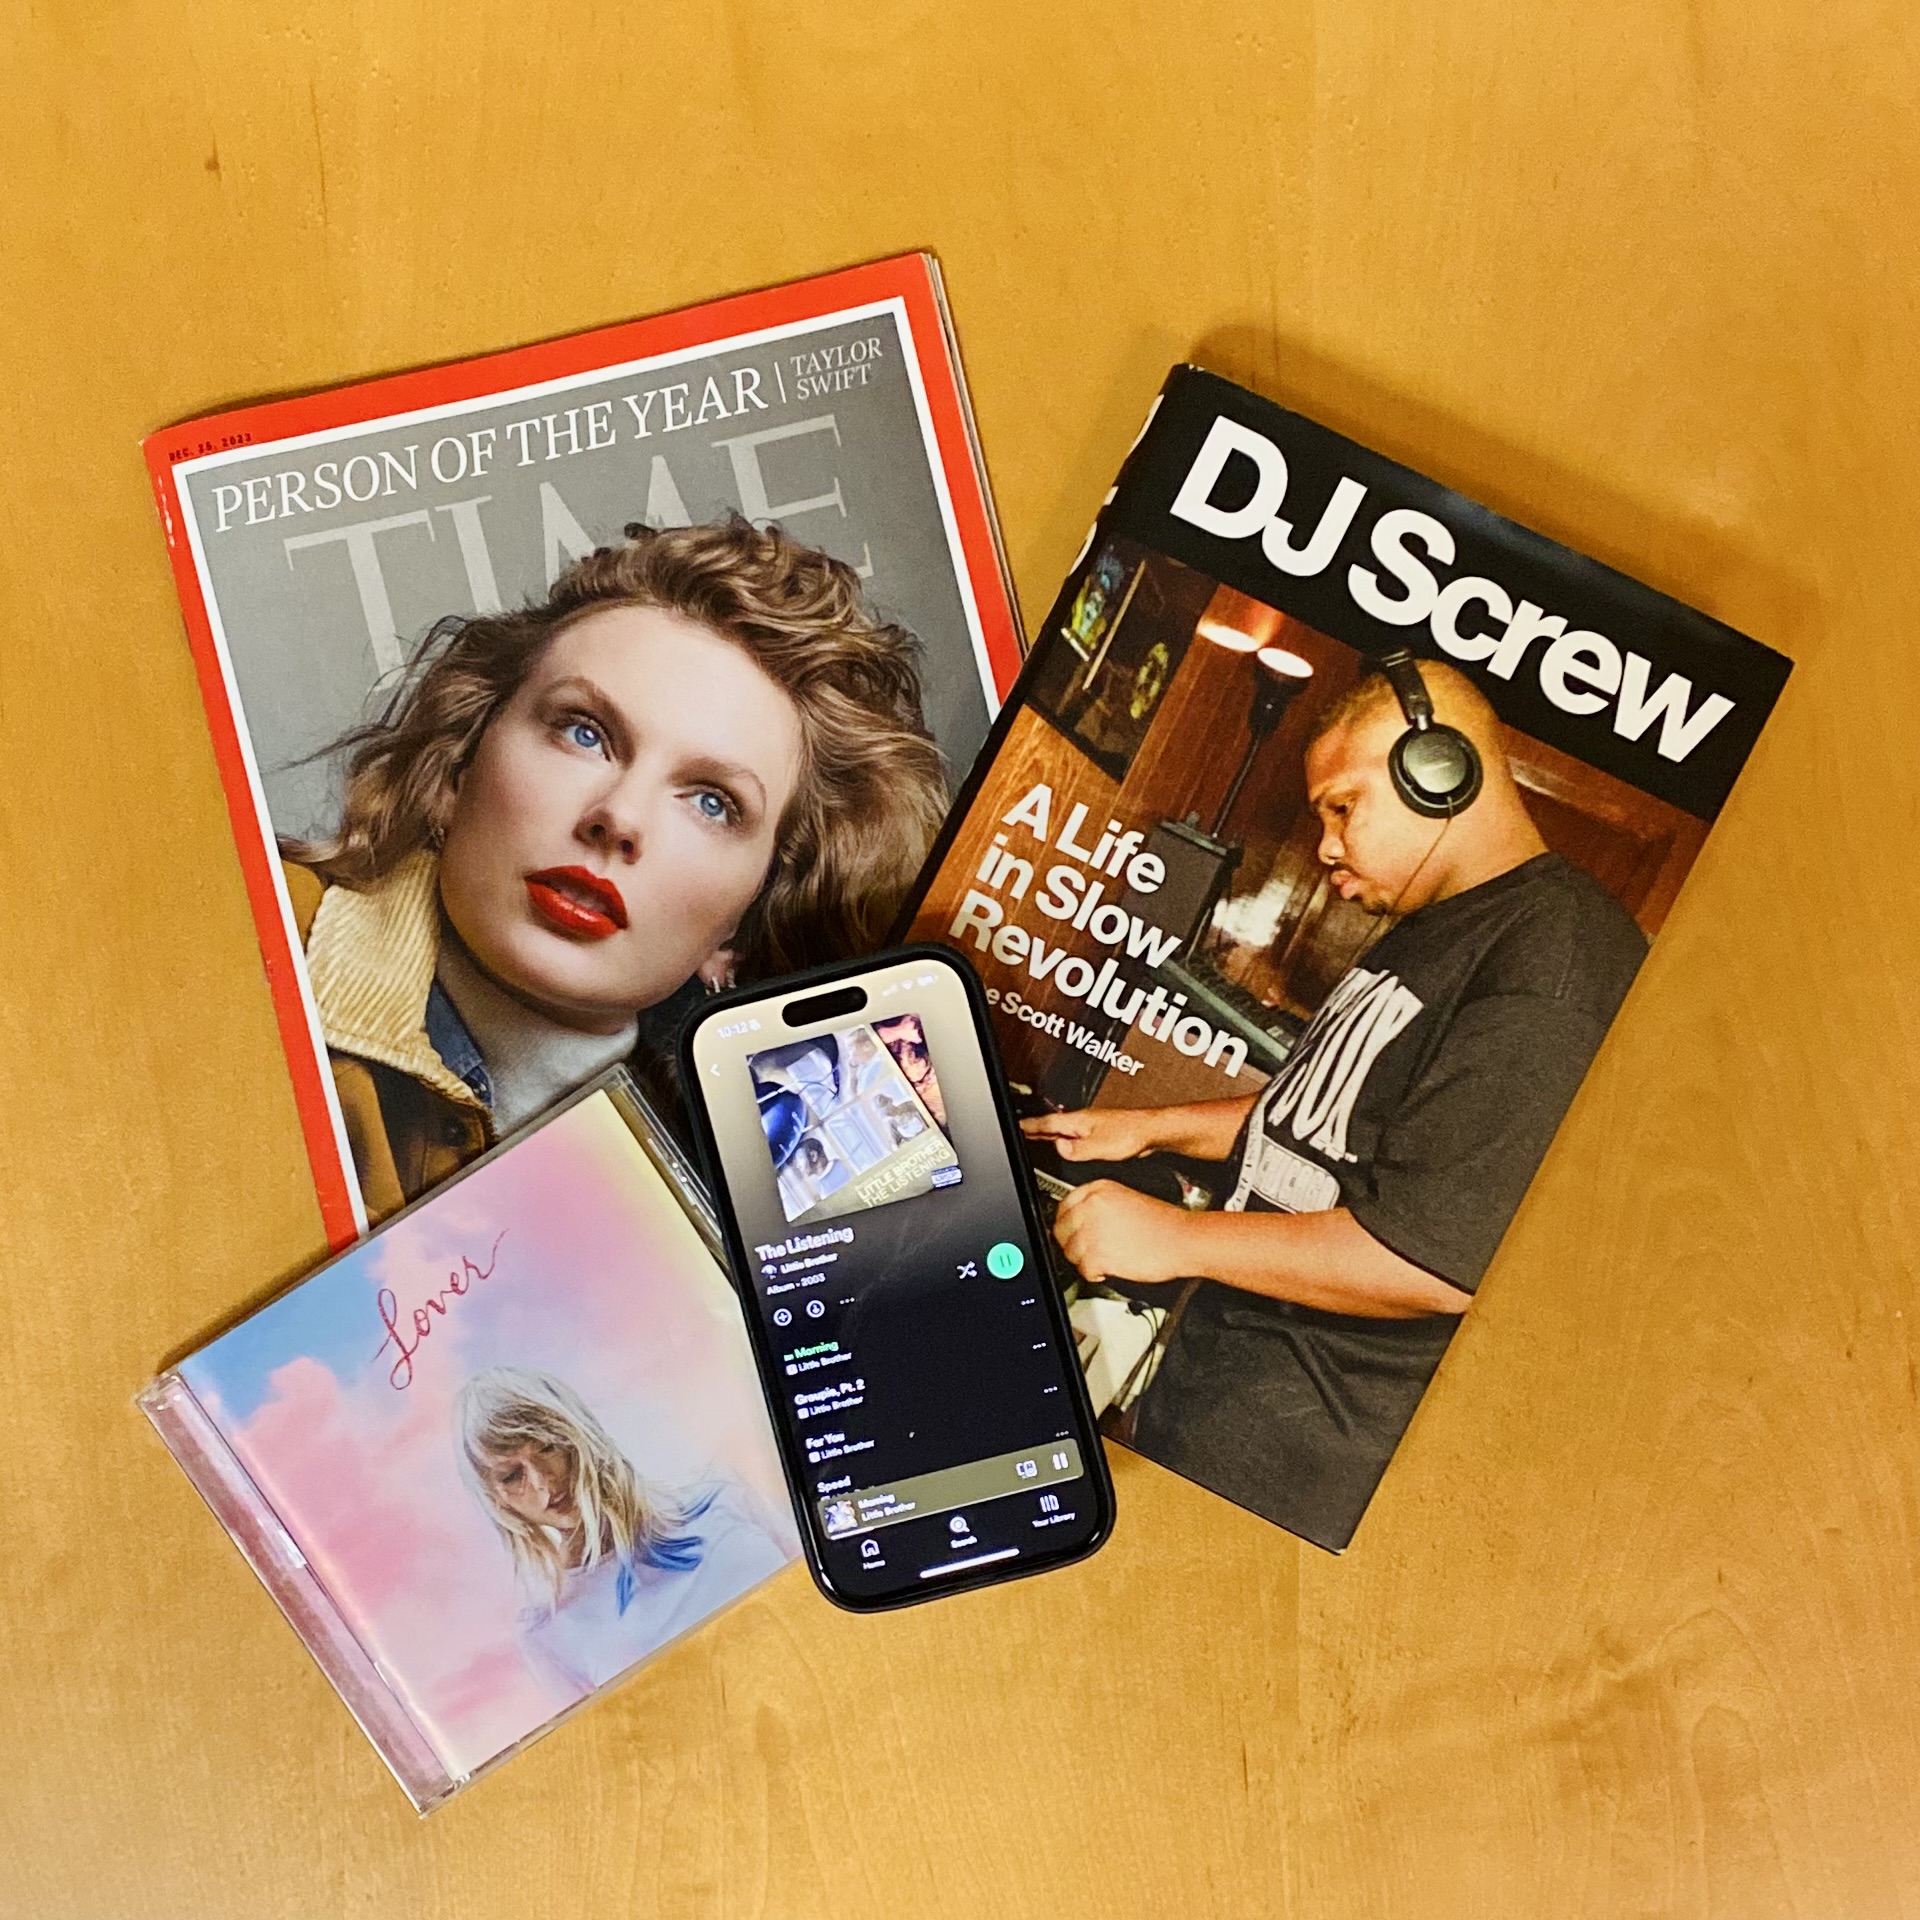 Time cover featuring Person of the year, Taylor Swift; CD case of Taylor Swift album Lover; book cover of DJ Screw: A Life of Slow Revolution; iPhone open to the Spotify app